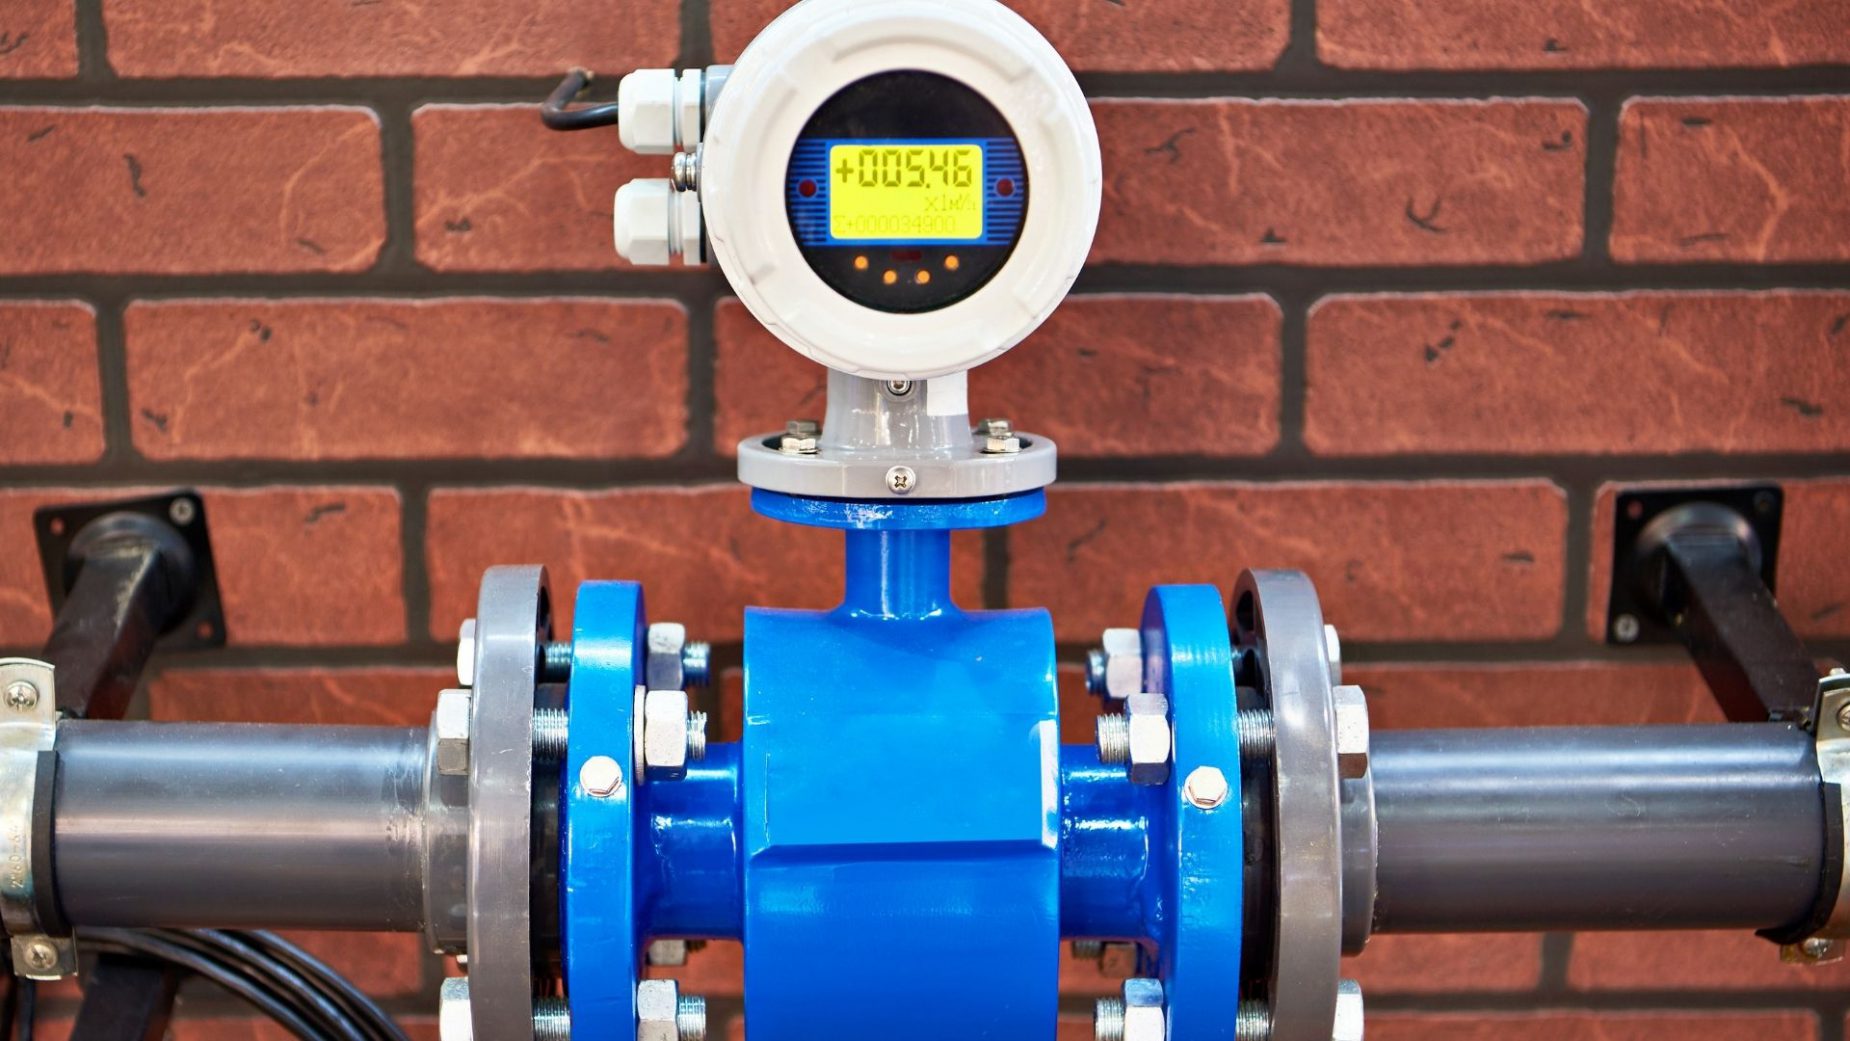 Global Flowmeter Market Overview And Prospects